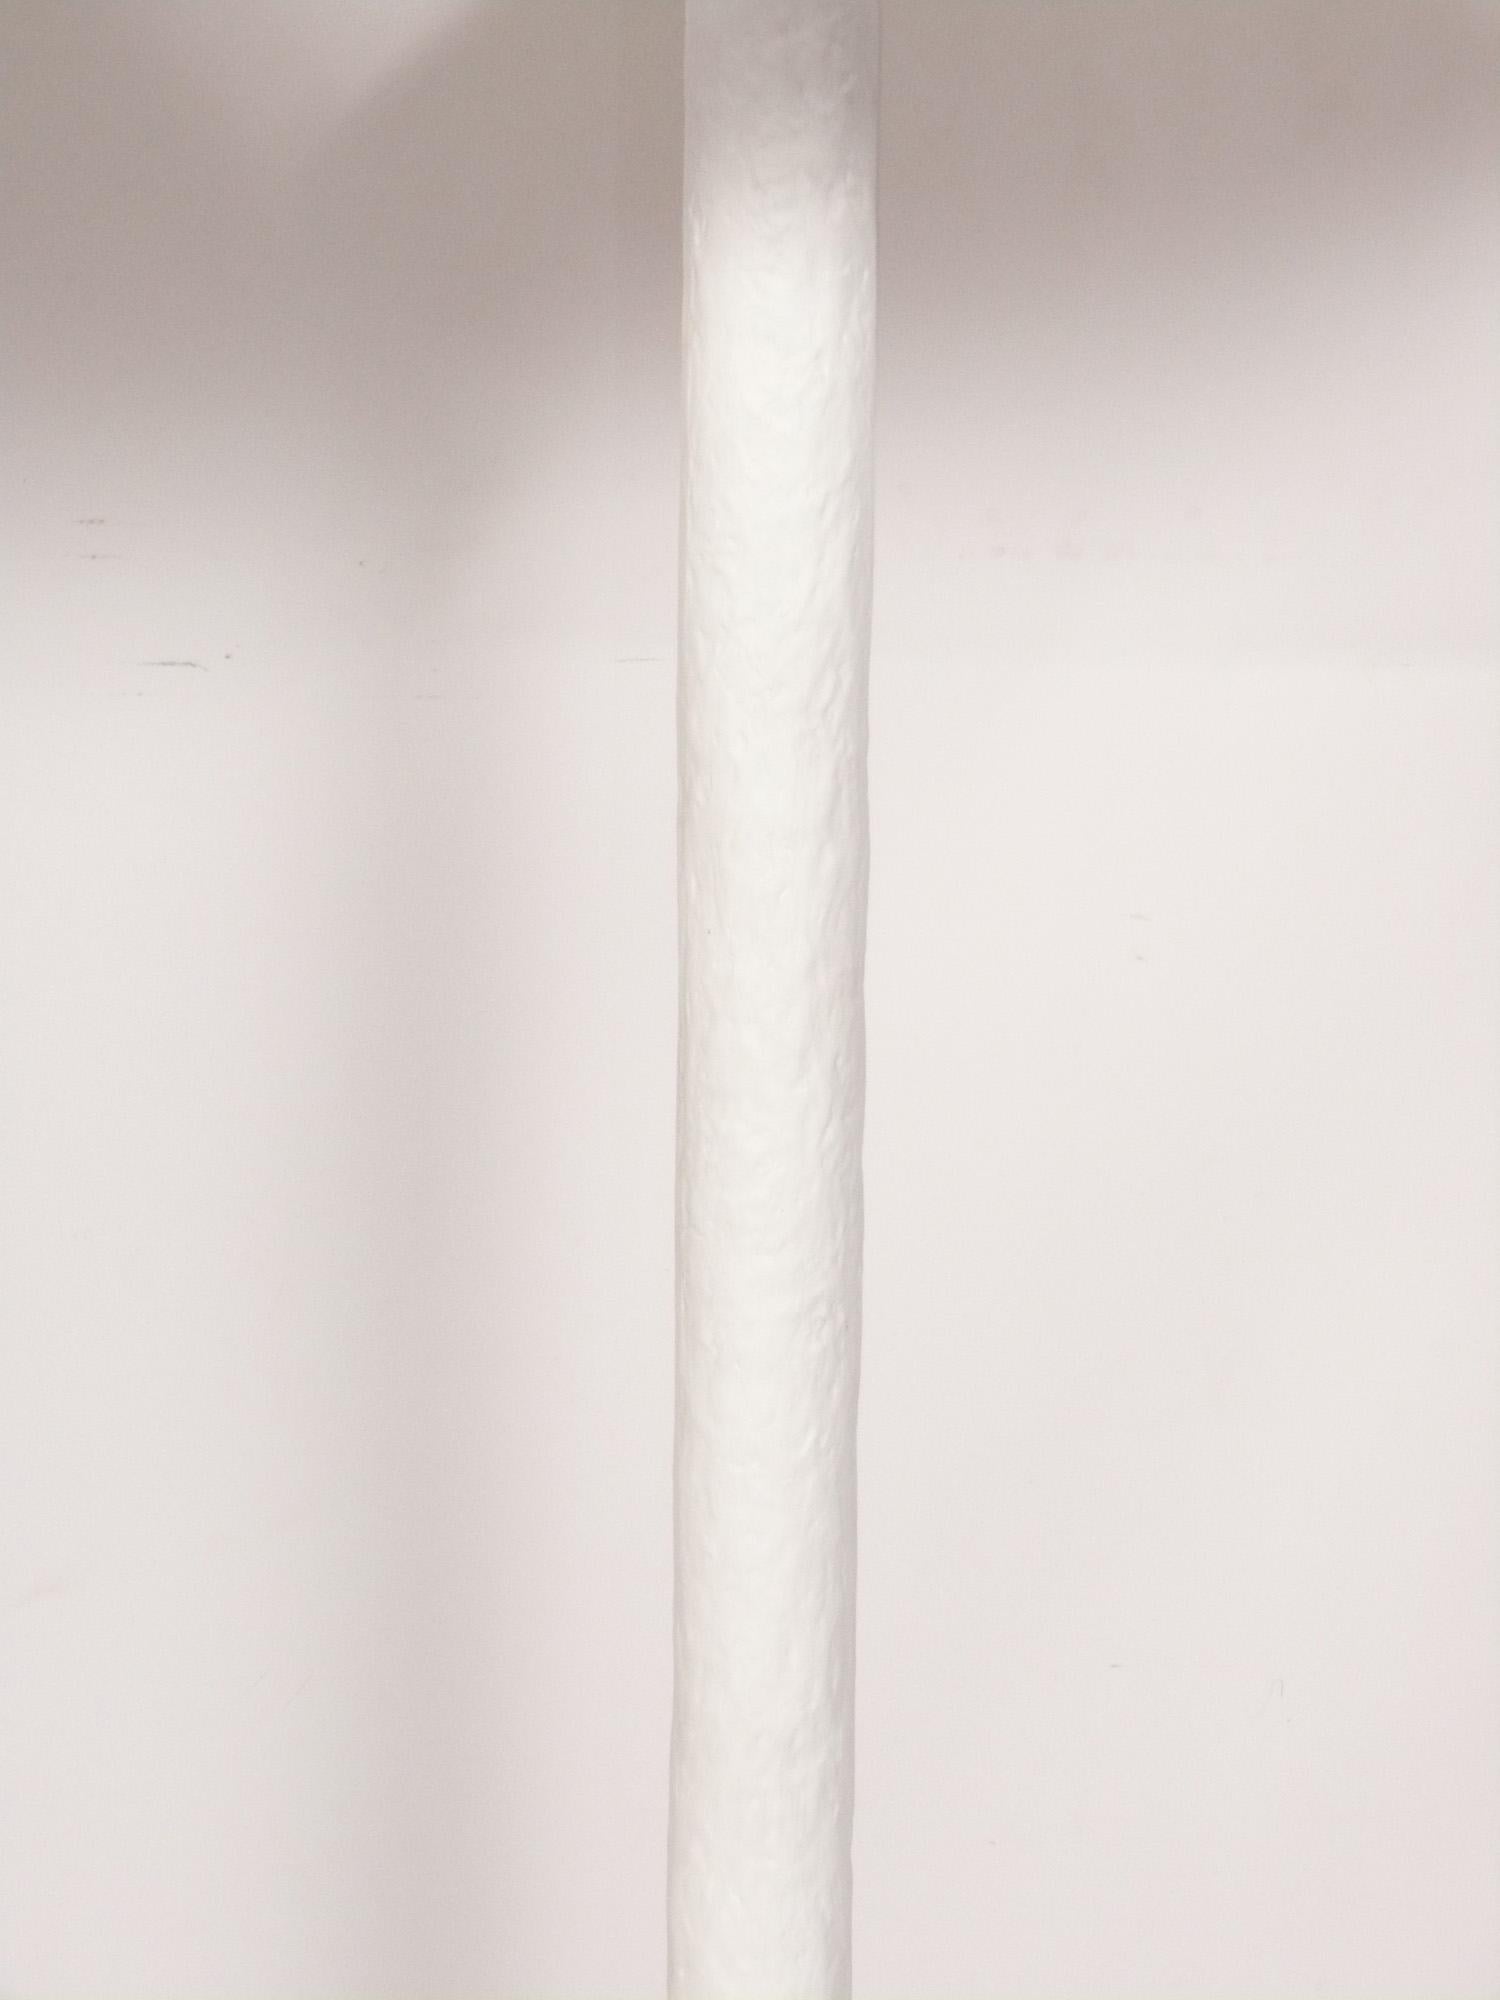 Pair of sculptural floor lamps in the style of Diego Giacometti, American, circa 2000s. They retain their original shades and are ready to use. The diameter of the base is 13